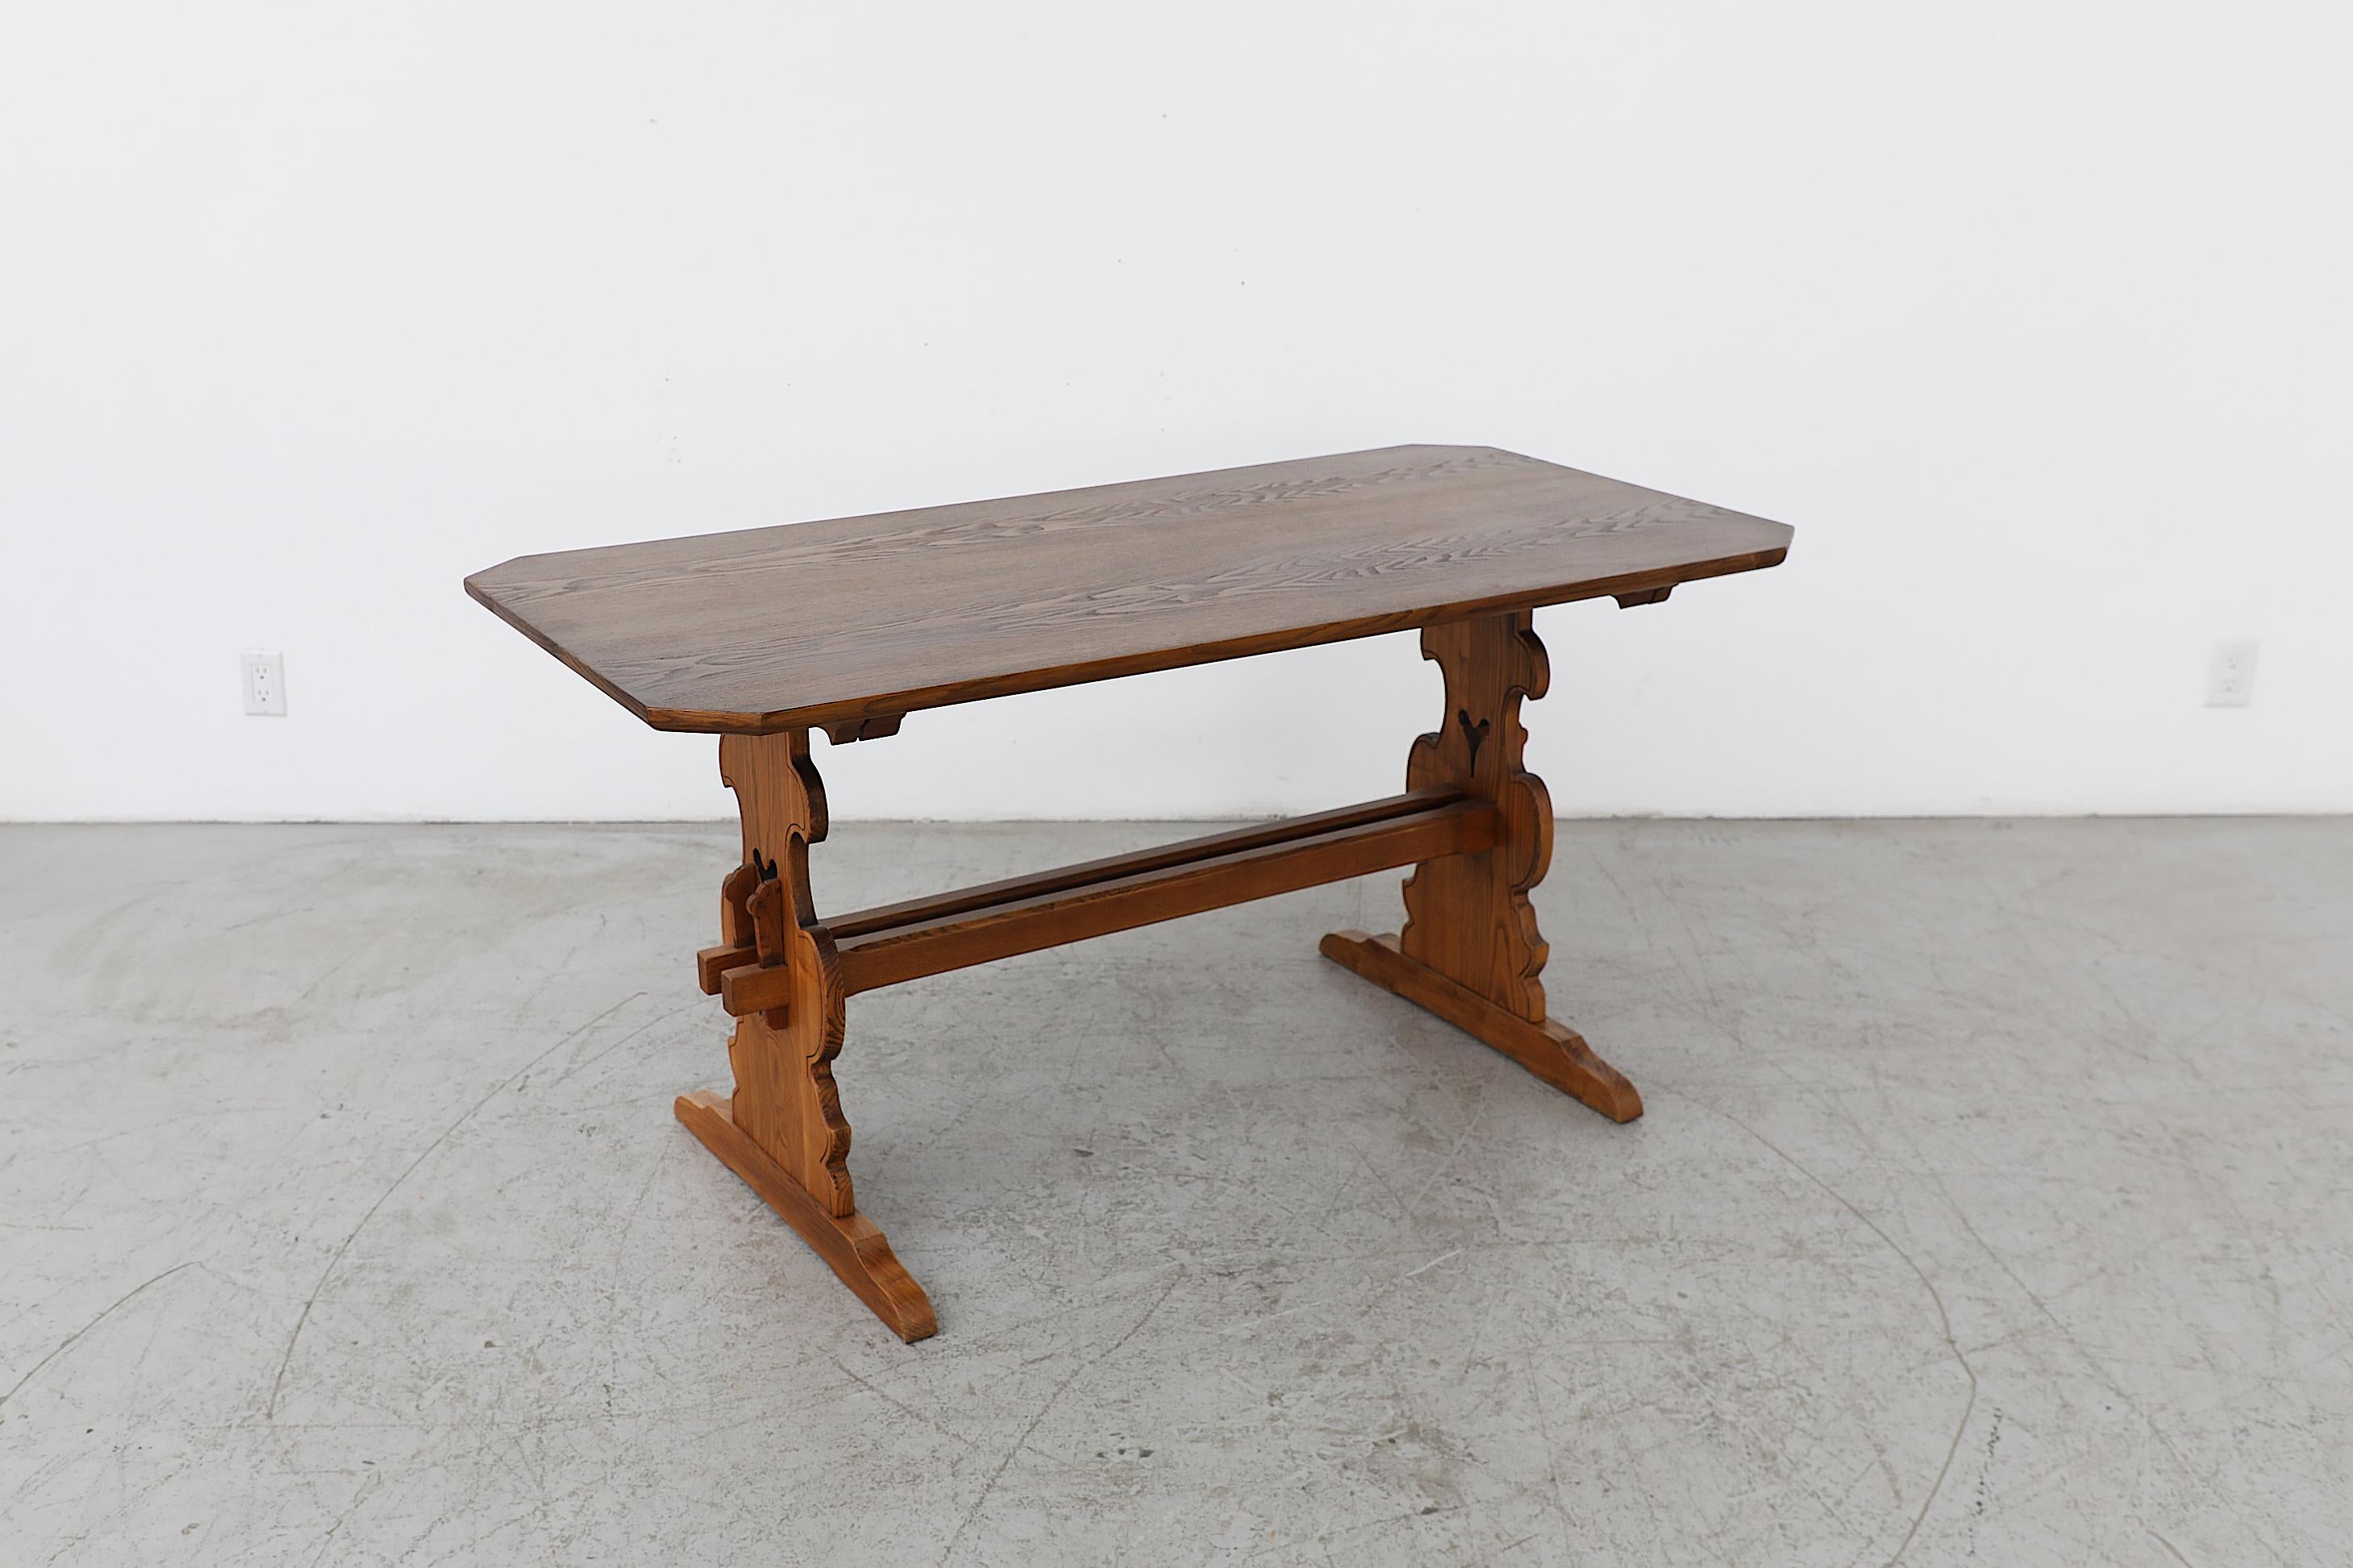 Austrian Ornate Brutalist Tyrolean Style Dark Pine Table with Angled Corners For Sale 12